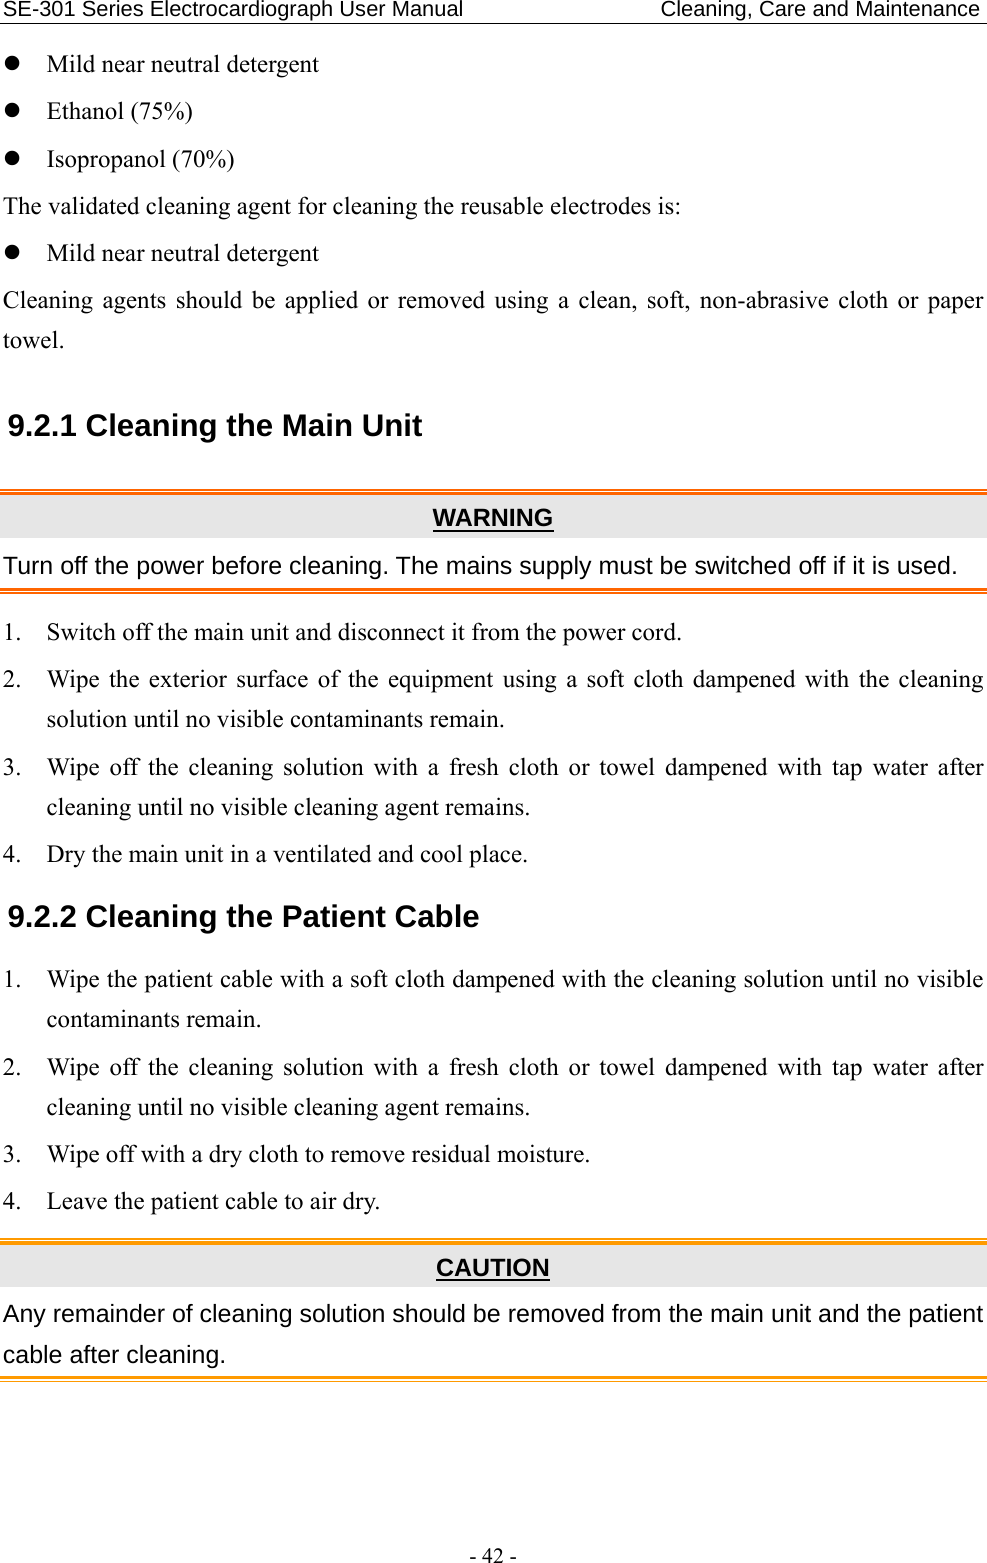 SE-301 Series Electrocardiograph User Manual                        Cleaning, Care and Maintenance - 42 -  Mild near neutral detergent  Ethanol (75%)  Isopropanol (70%) The validated cleaning agent for cleaning the reusable electrodes is:  Mild near neutral detergent Cleaning agents should be applied or removed using a clean, soft, non-abrasive cloth or paper towel. 9.2.1 Cleaning the Main Unit WARNING Turn off the power before cleaning. The mains supply must be switched off if it is used. 1. Switch off the main unit and disconnect it from the power cord. 2. Wipe the exterior surface of the equipment using a soft cloth dampened with the cleaning solution until no visible contaminants remain. 3. Wipe off the cleaning solution with a fresh cloth or towel dampened with tap water after cleaning until no visible cleaning agent remains. 4. Dry the main unit in a ventilated and cool place. 9.2.2 Cleaning the Patient Cable 1. Wipe the patient cable with a soft cloth dampened with the cleaning solution until no visible contaminants remain. 2. Wipe off the cleaning solution with a fresh cloth or towel dampened with tap water after cleaning until no visible cleaning agent remains. 3. Wipe off with a dry cloth to remove residual moisture. 4. Leave the patient cable to air dry. CAUTION Any remainder of cleaning solution should be removed from the main unit and the patient cable after cleaning. 